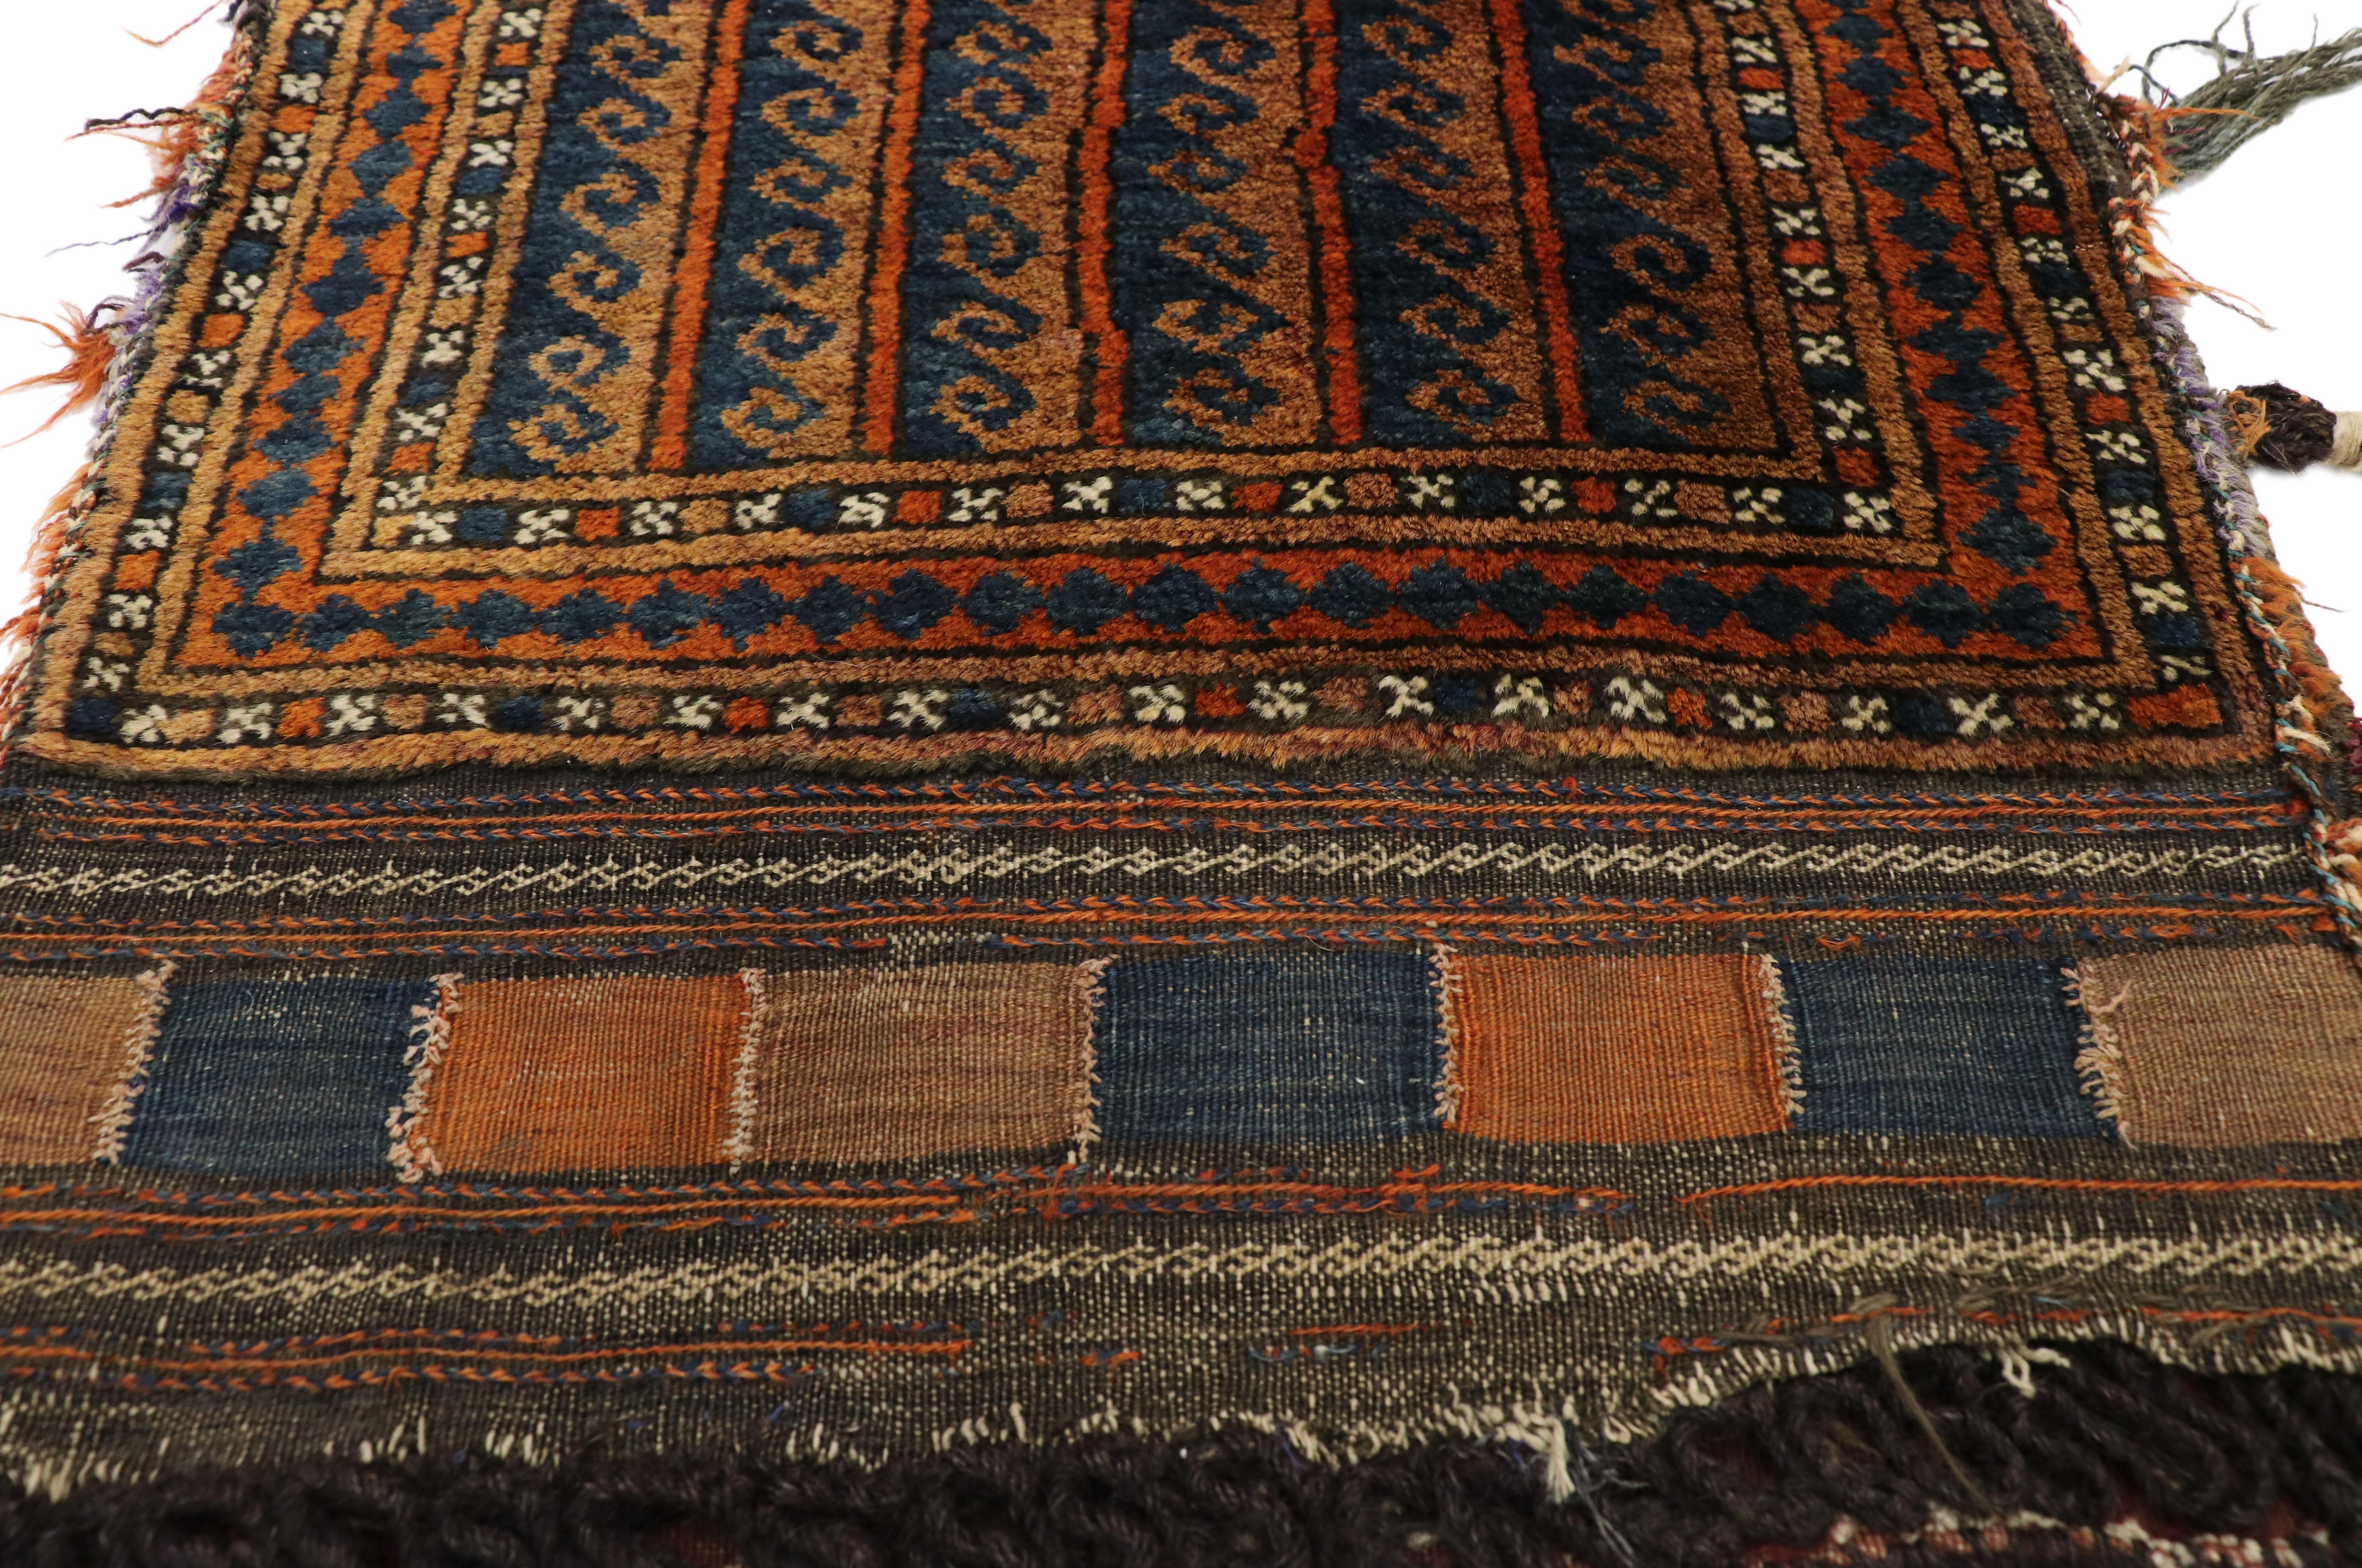 Hand-Knotted Antique Afghan Baluch Balisht Bag, Tribal Style Tapestry, Nomadic Wall Hanging